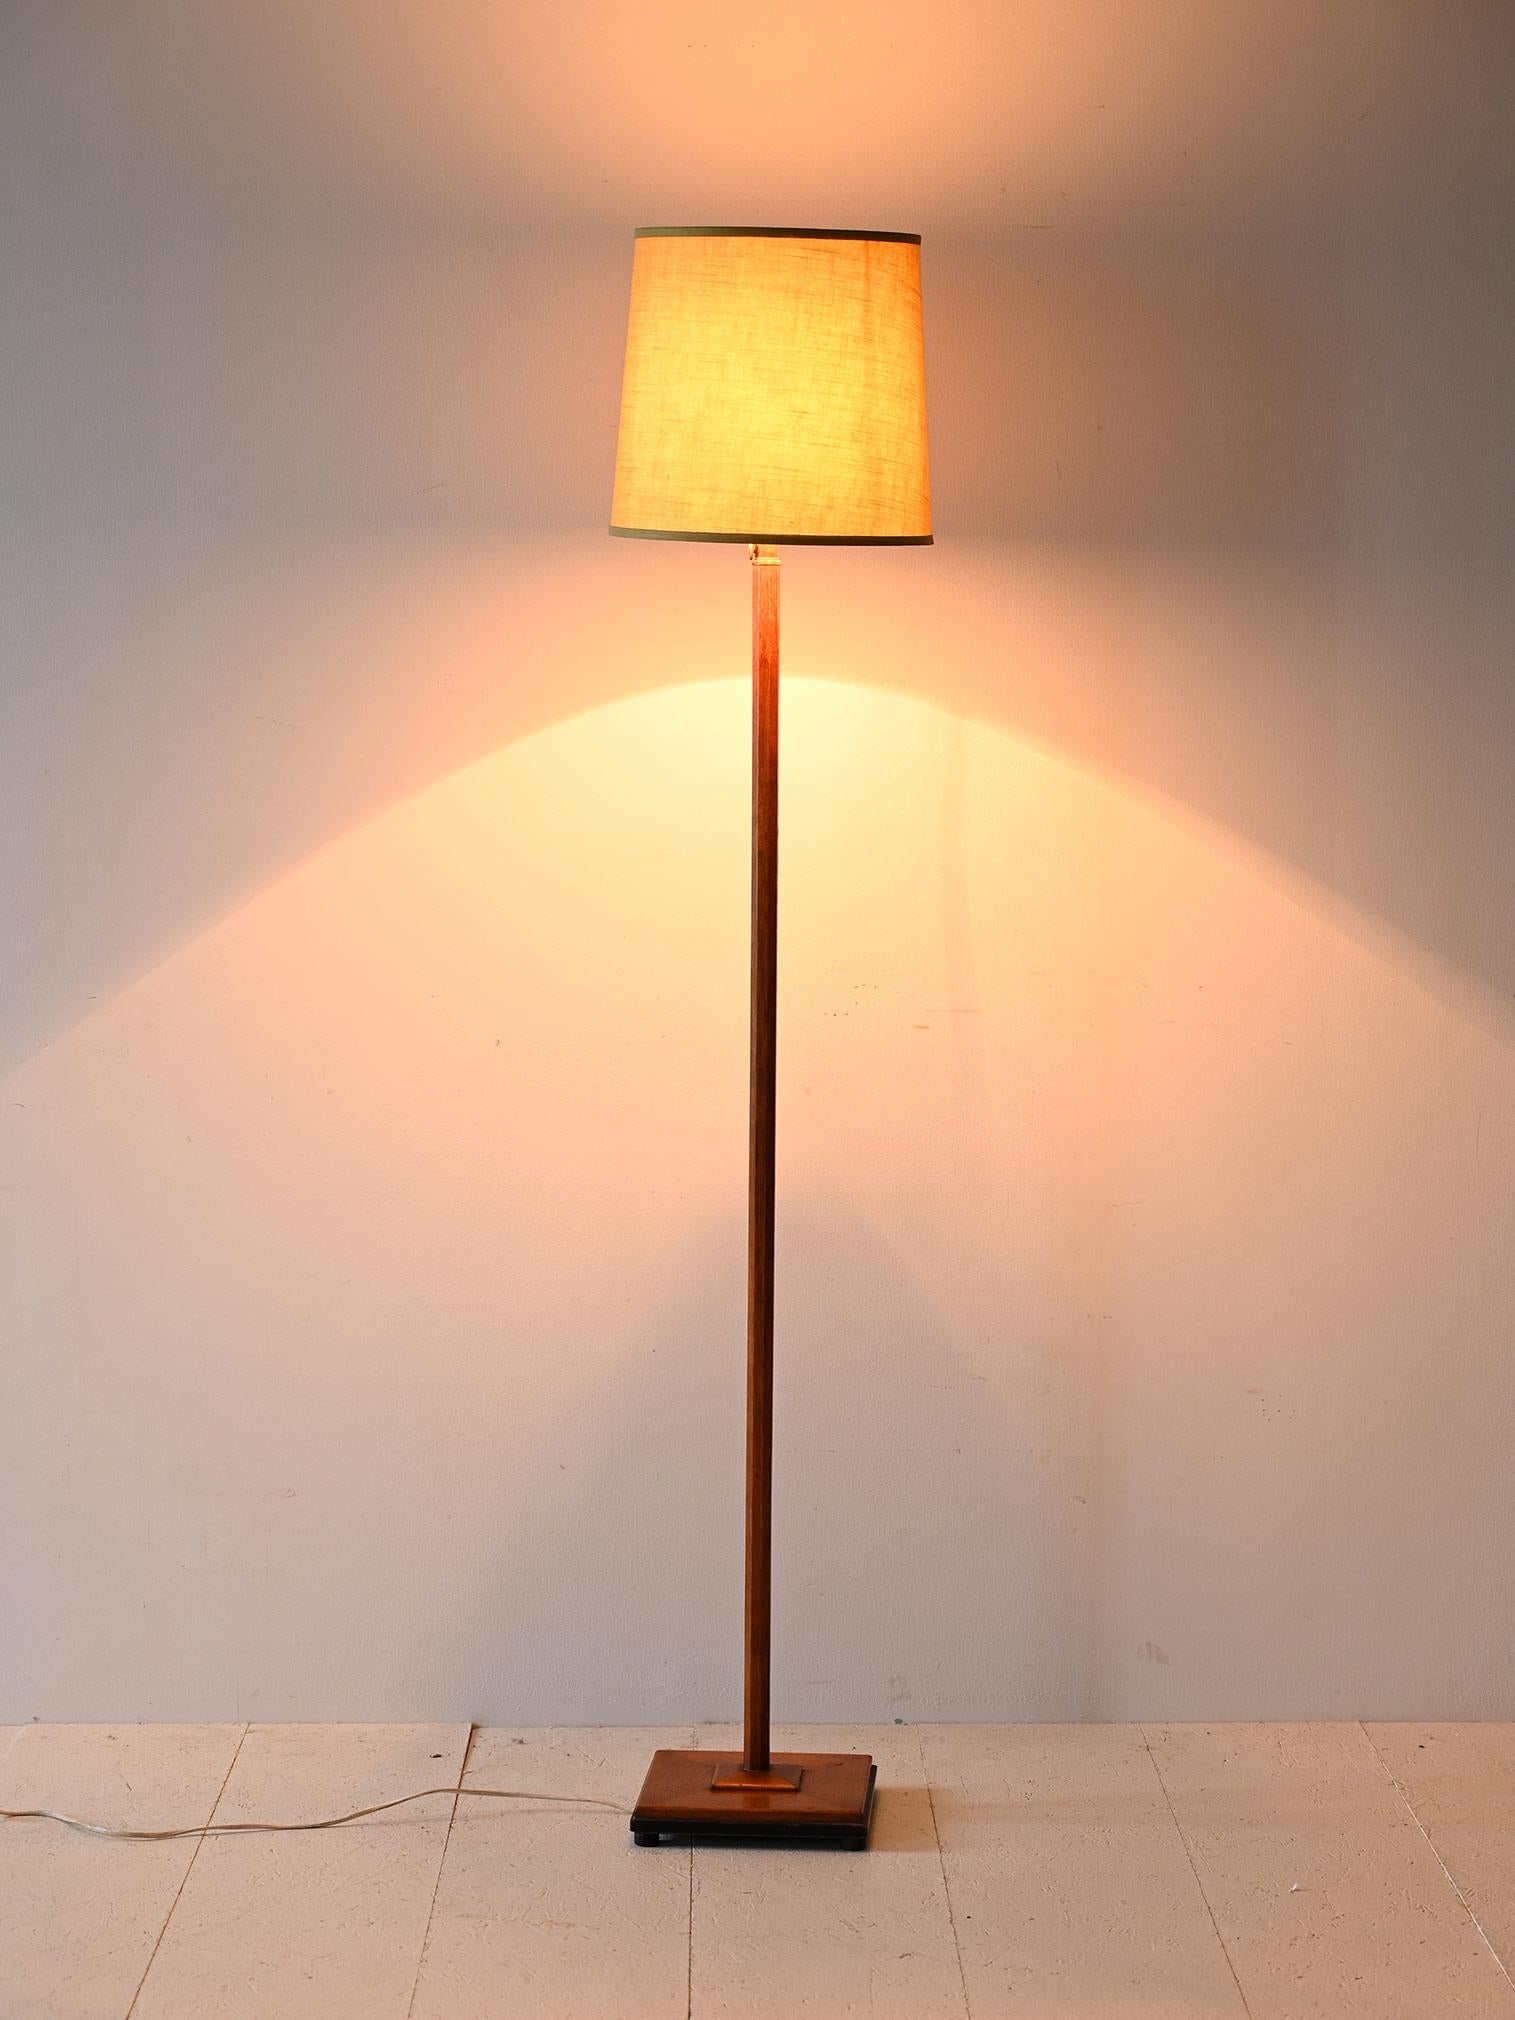 Original vintage Nordic lamp from the 1950s.

Scandinavian lamp with a Nordic design, featuring a teak wood frame that gives a natural and refined touch. The yellow fabric lampshade adds a note of vibrancy and warmth, creating a cozy and unique